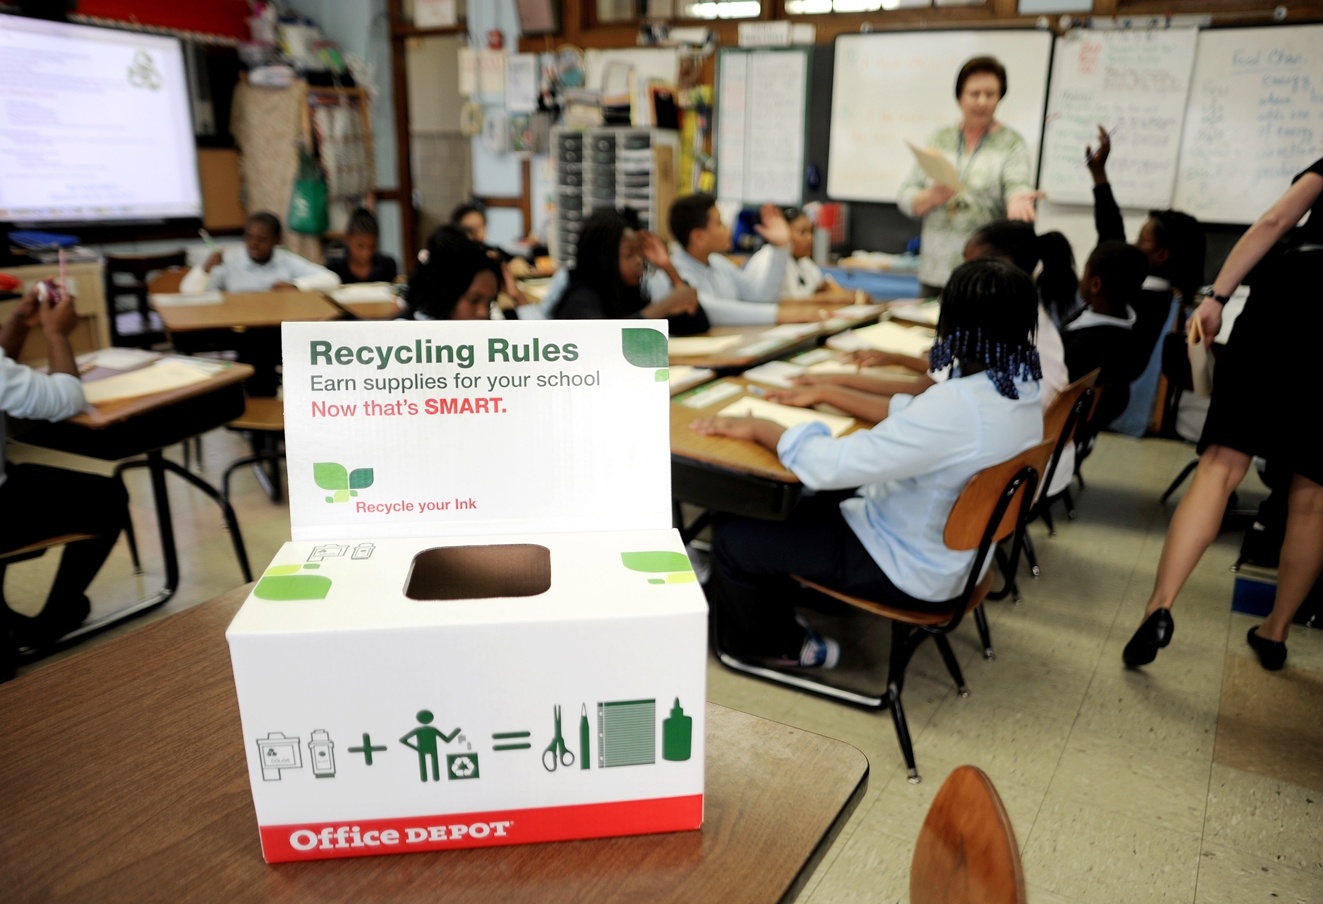 10 ways to save big on printer ink and toner – Recycling rules toner box in a classroom